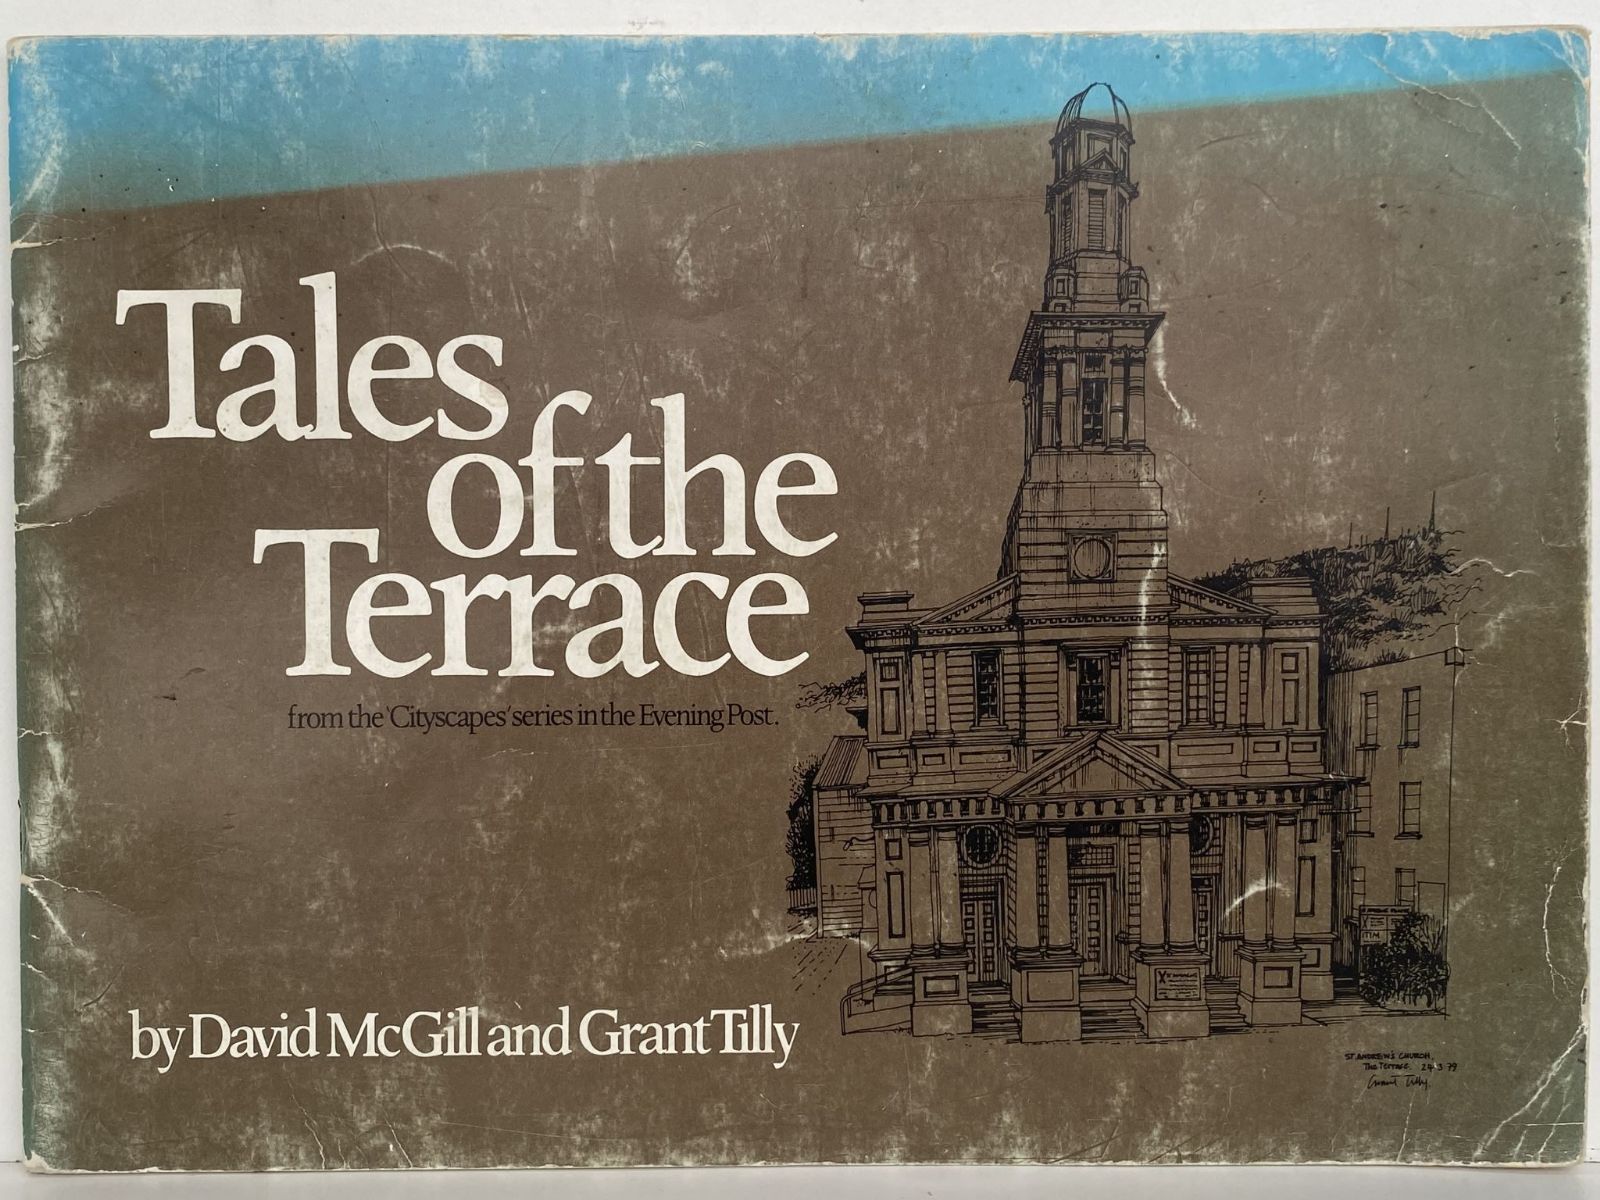 TALES of the TERRACE: From the Cityscapes series in the Evening Post